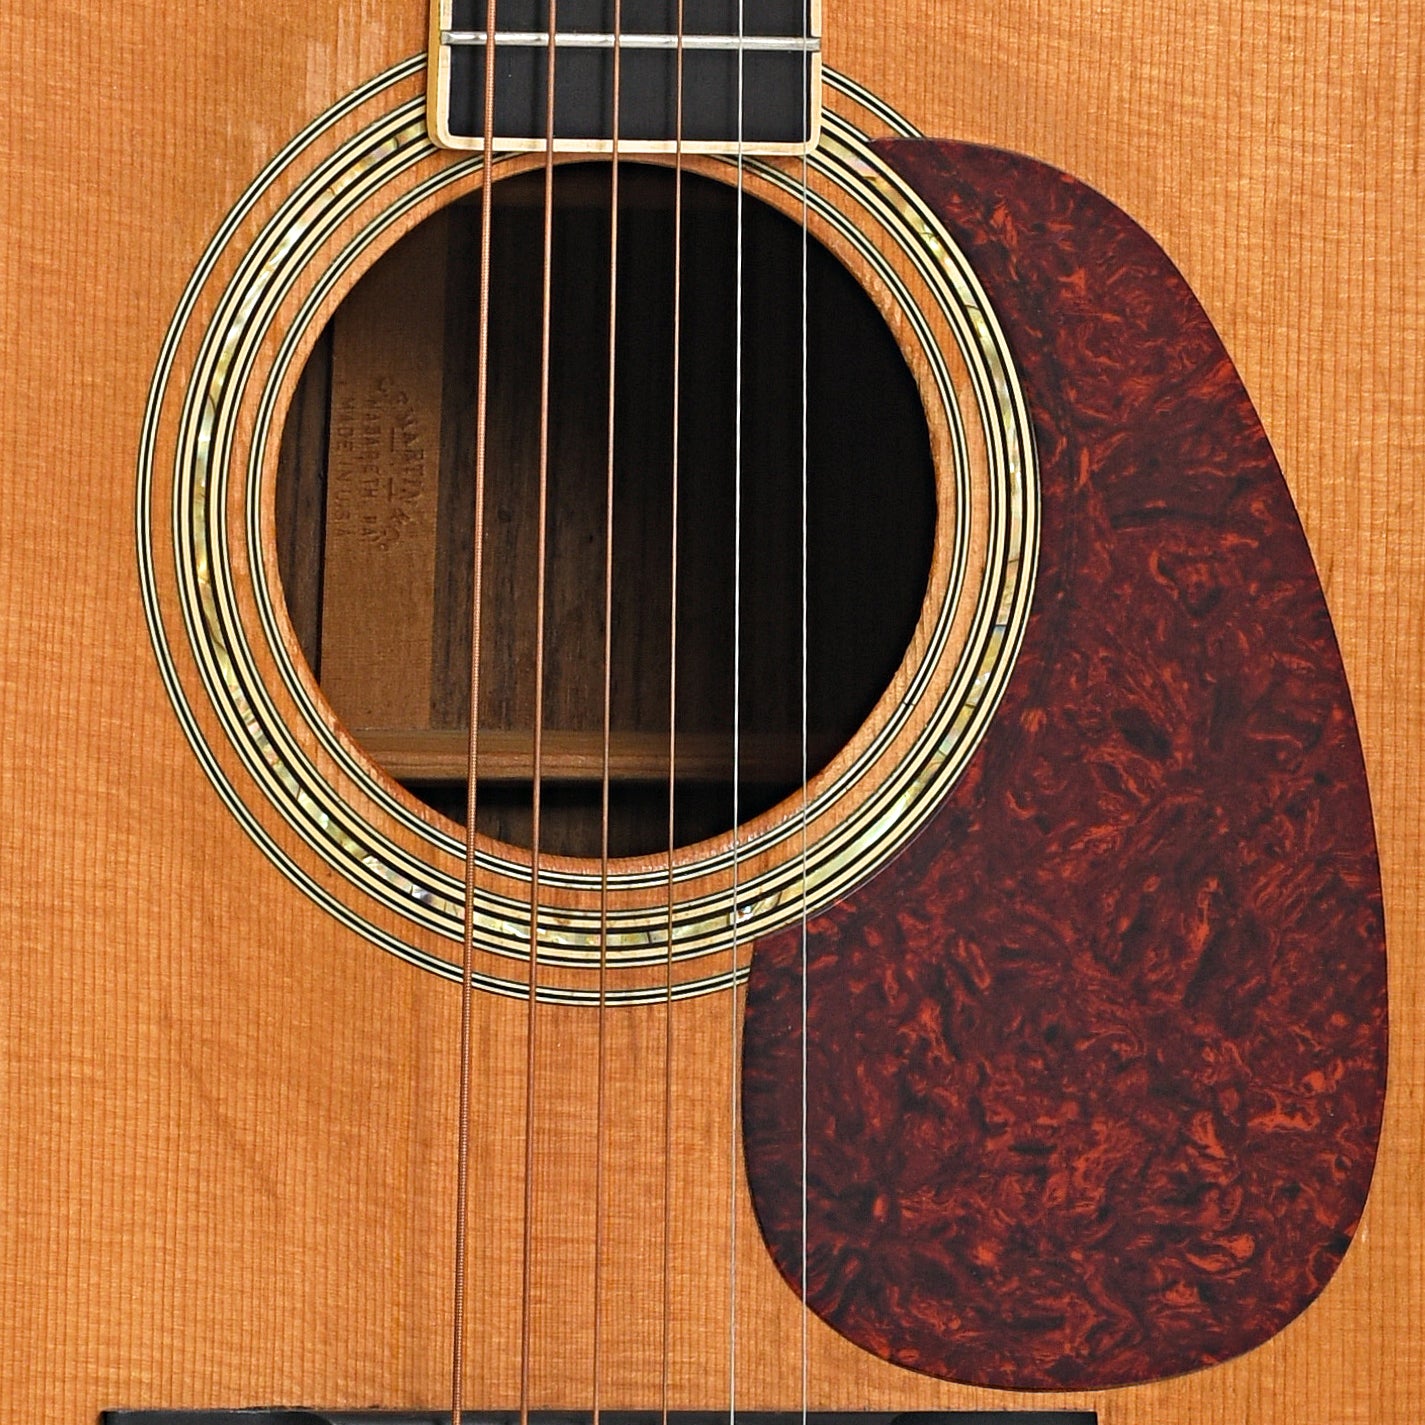 Soudn hole of Martin D-41 Acoustic Guitar (1999)